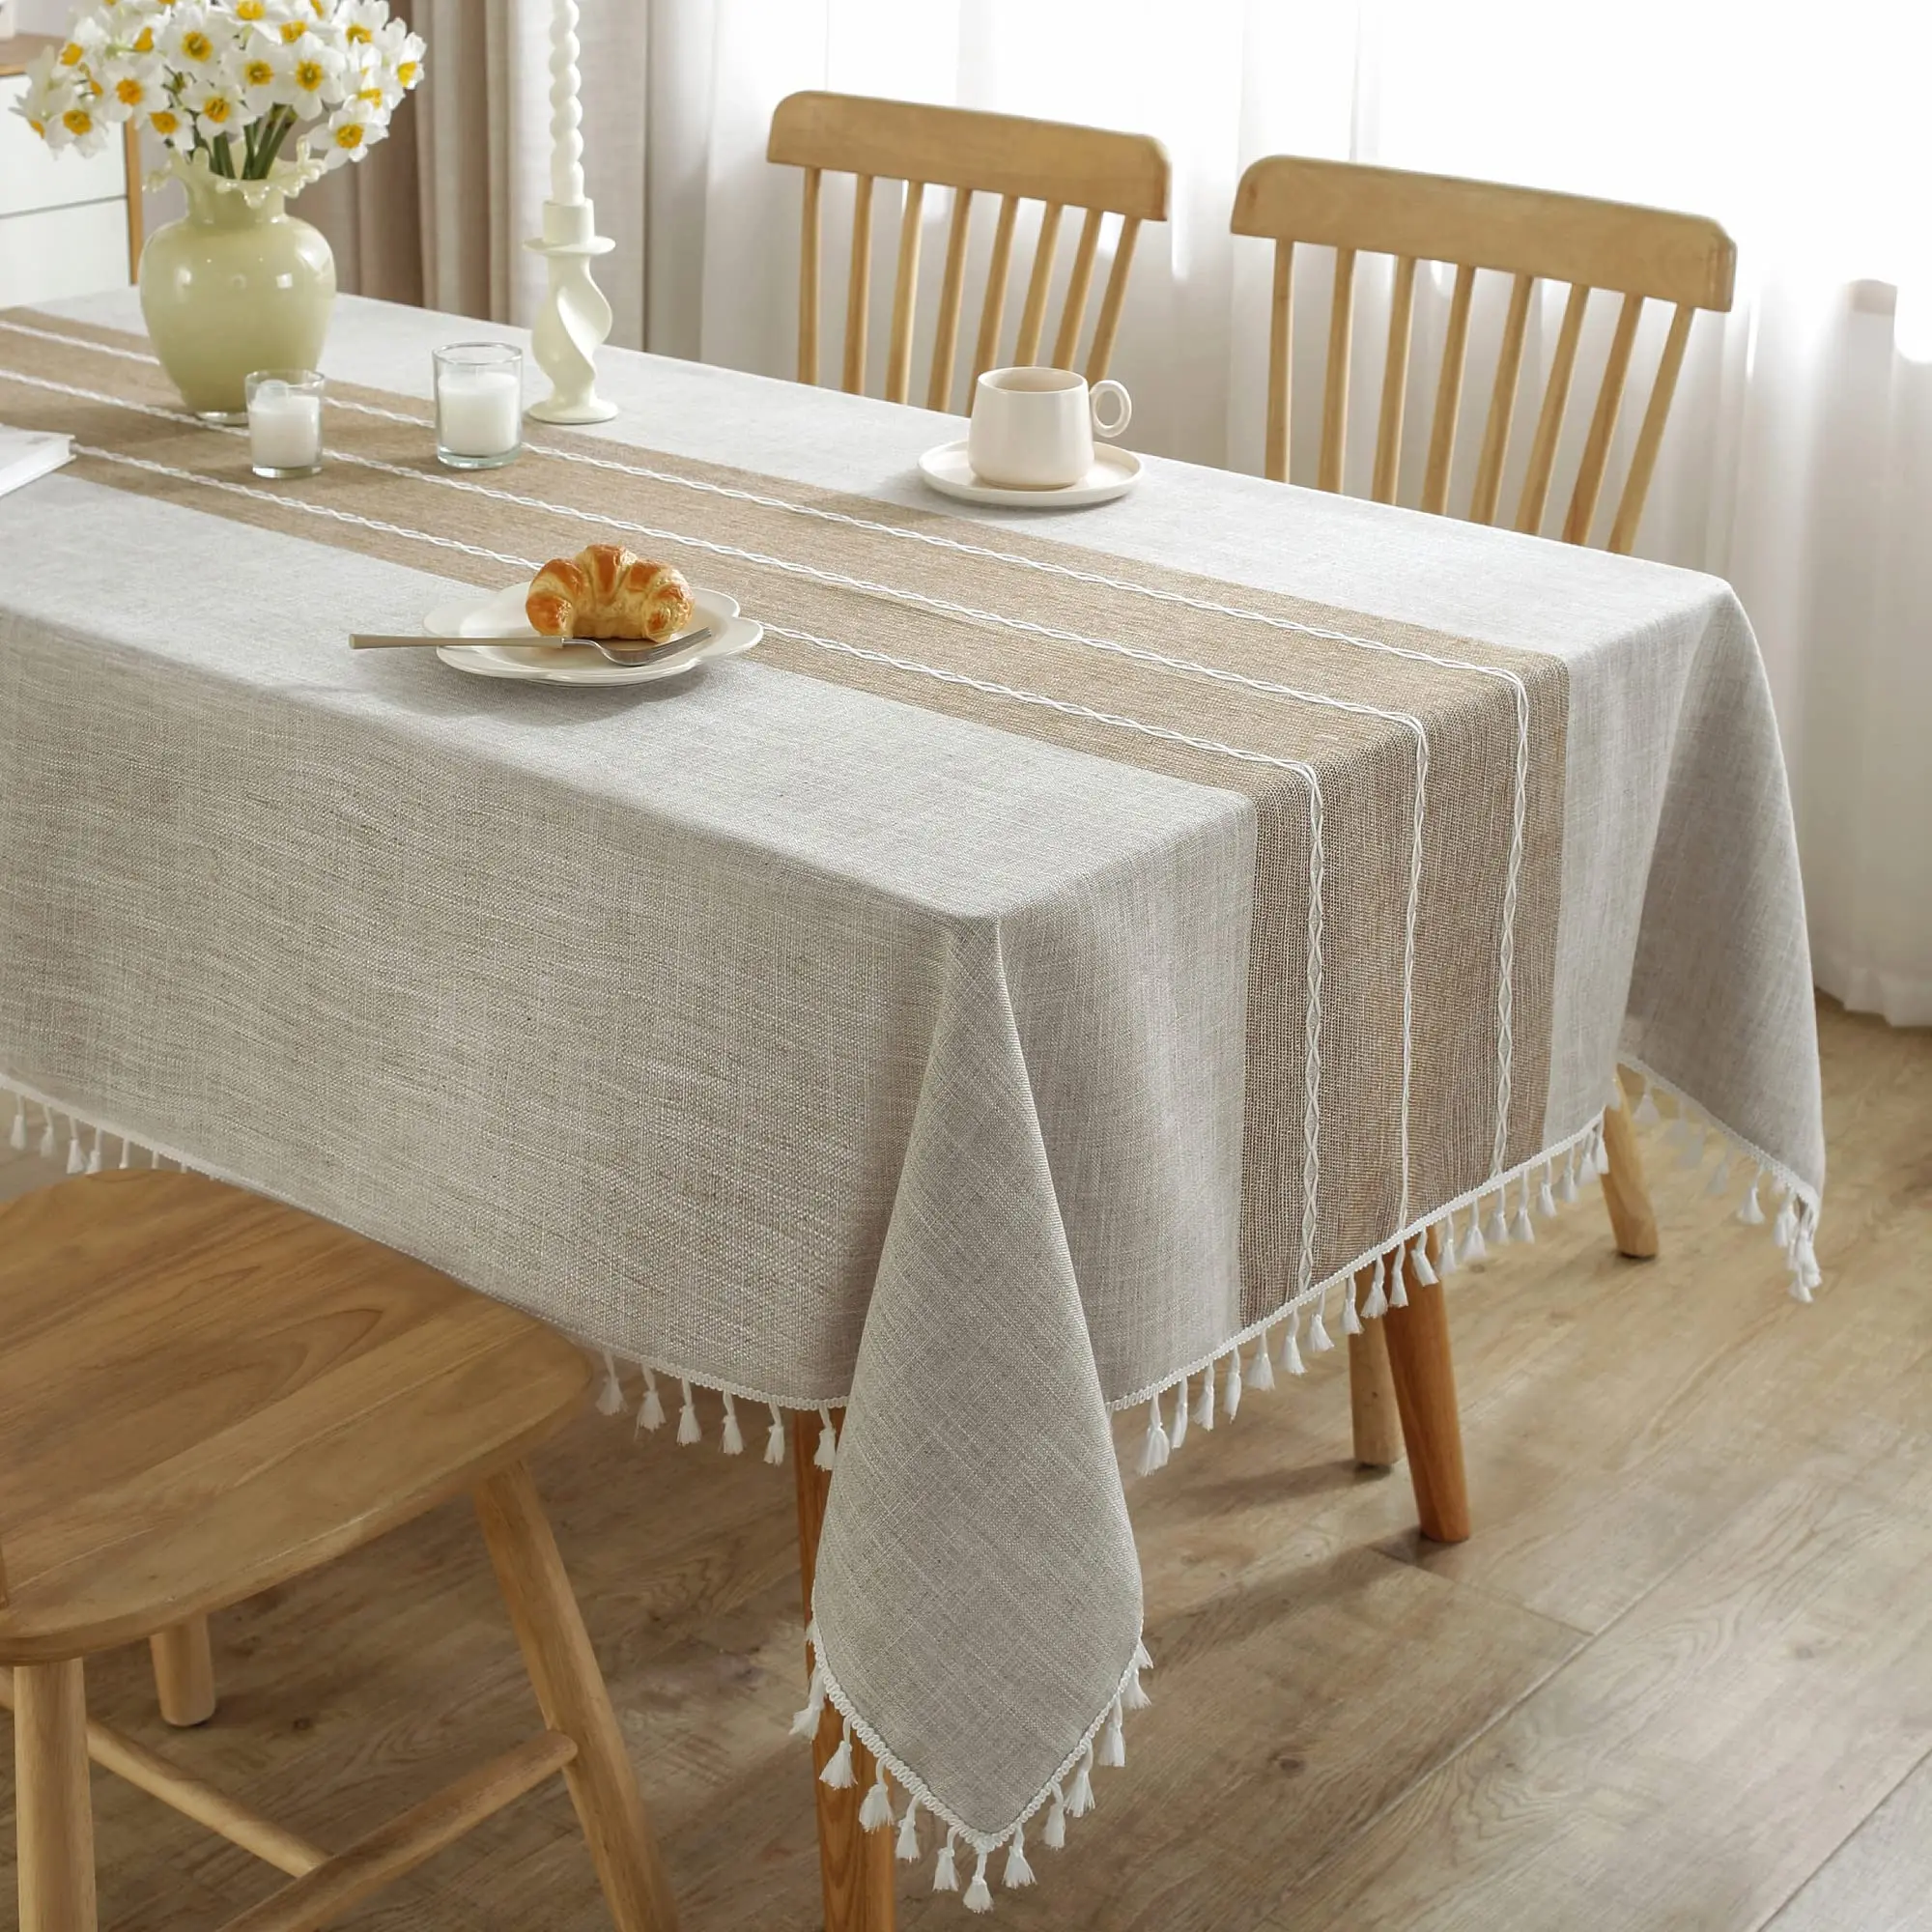 

Tablecloths for Rectangle Tables,Cotton Linen Waterproof Tablecloth Wrinkle Free Soft Fabric Table Cover Cloths with Tassels